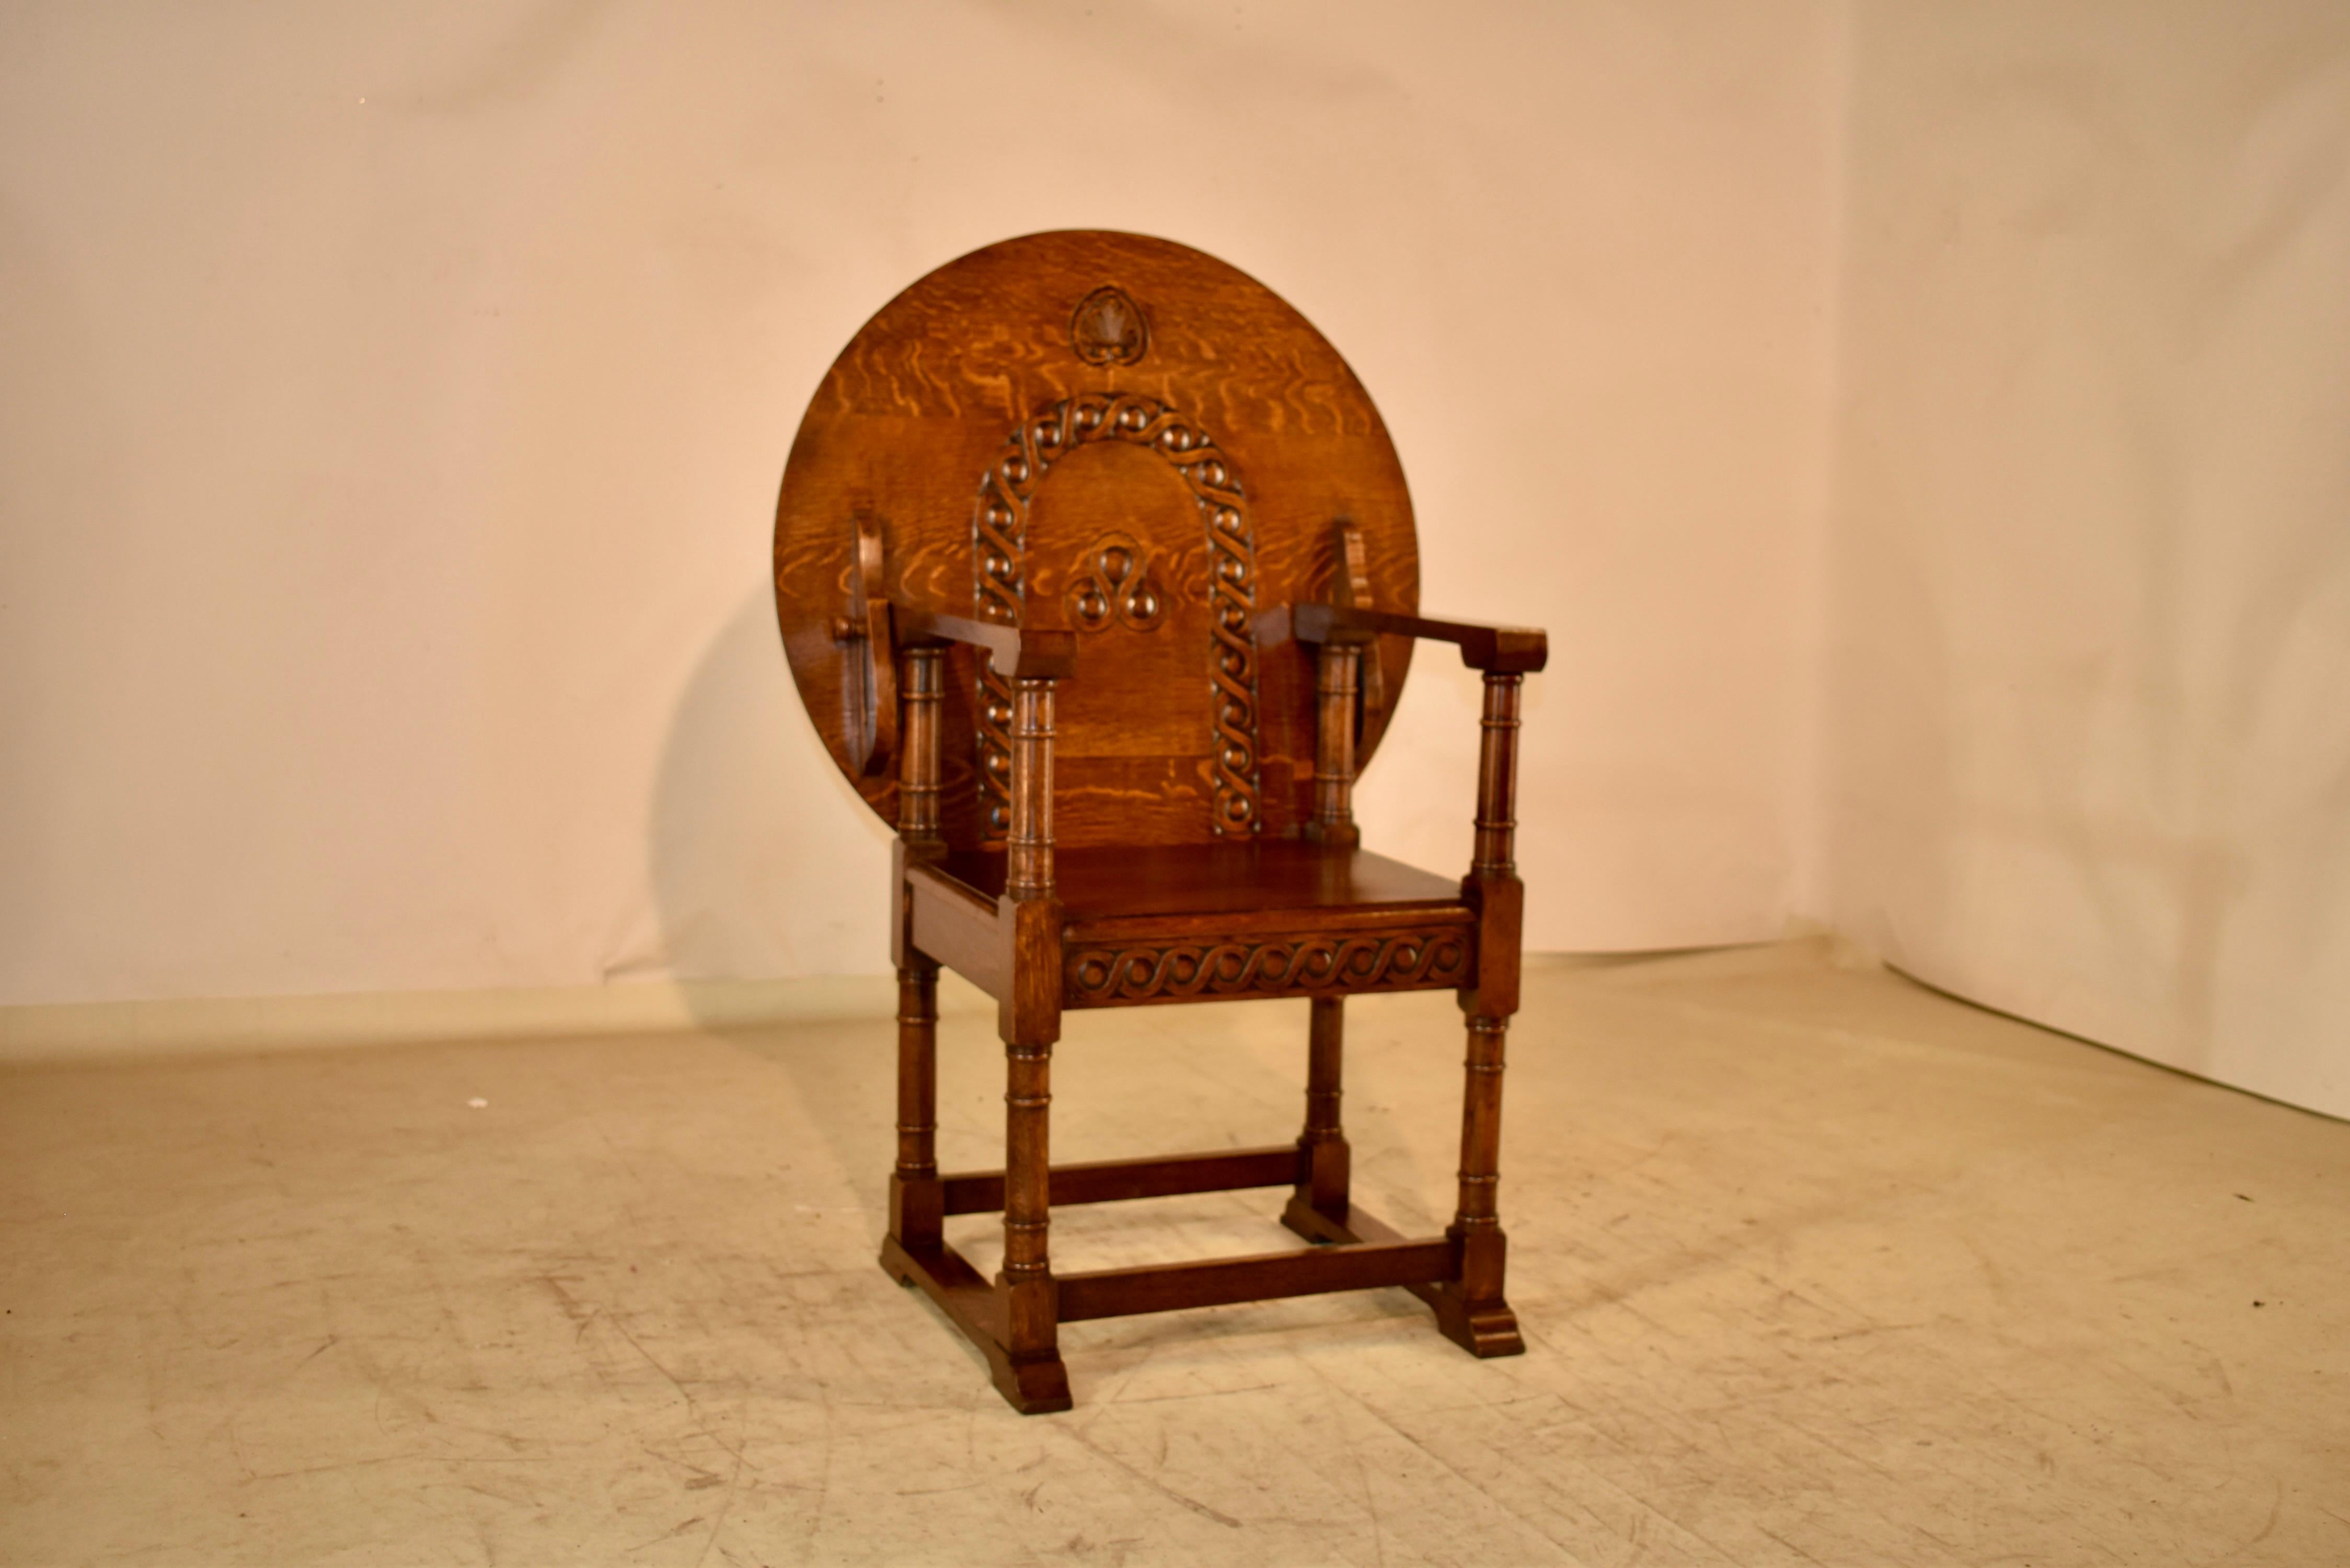 Late 19th century oak Monk's seat from England. When the top is up, it can be used for comfortable seating. The seat back has hand carved details for added interest. The seat can then be converted easily into a table top by sliding the back of the